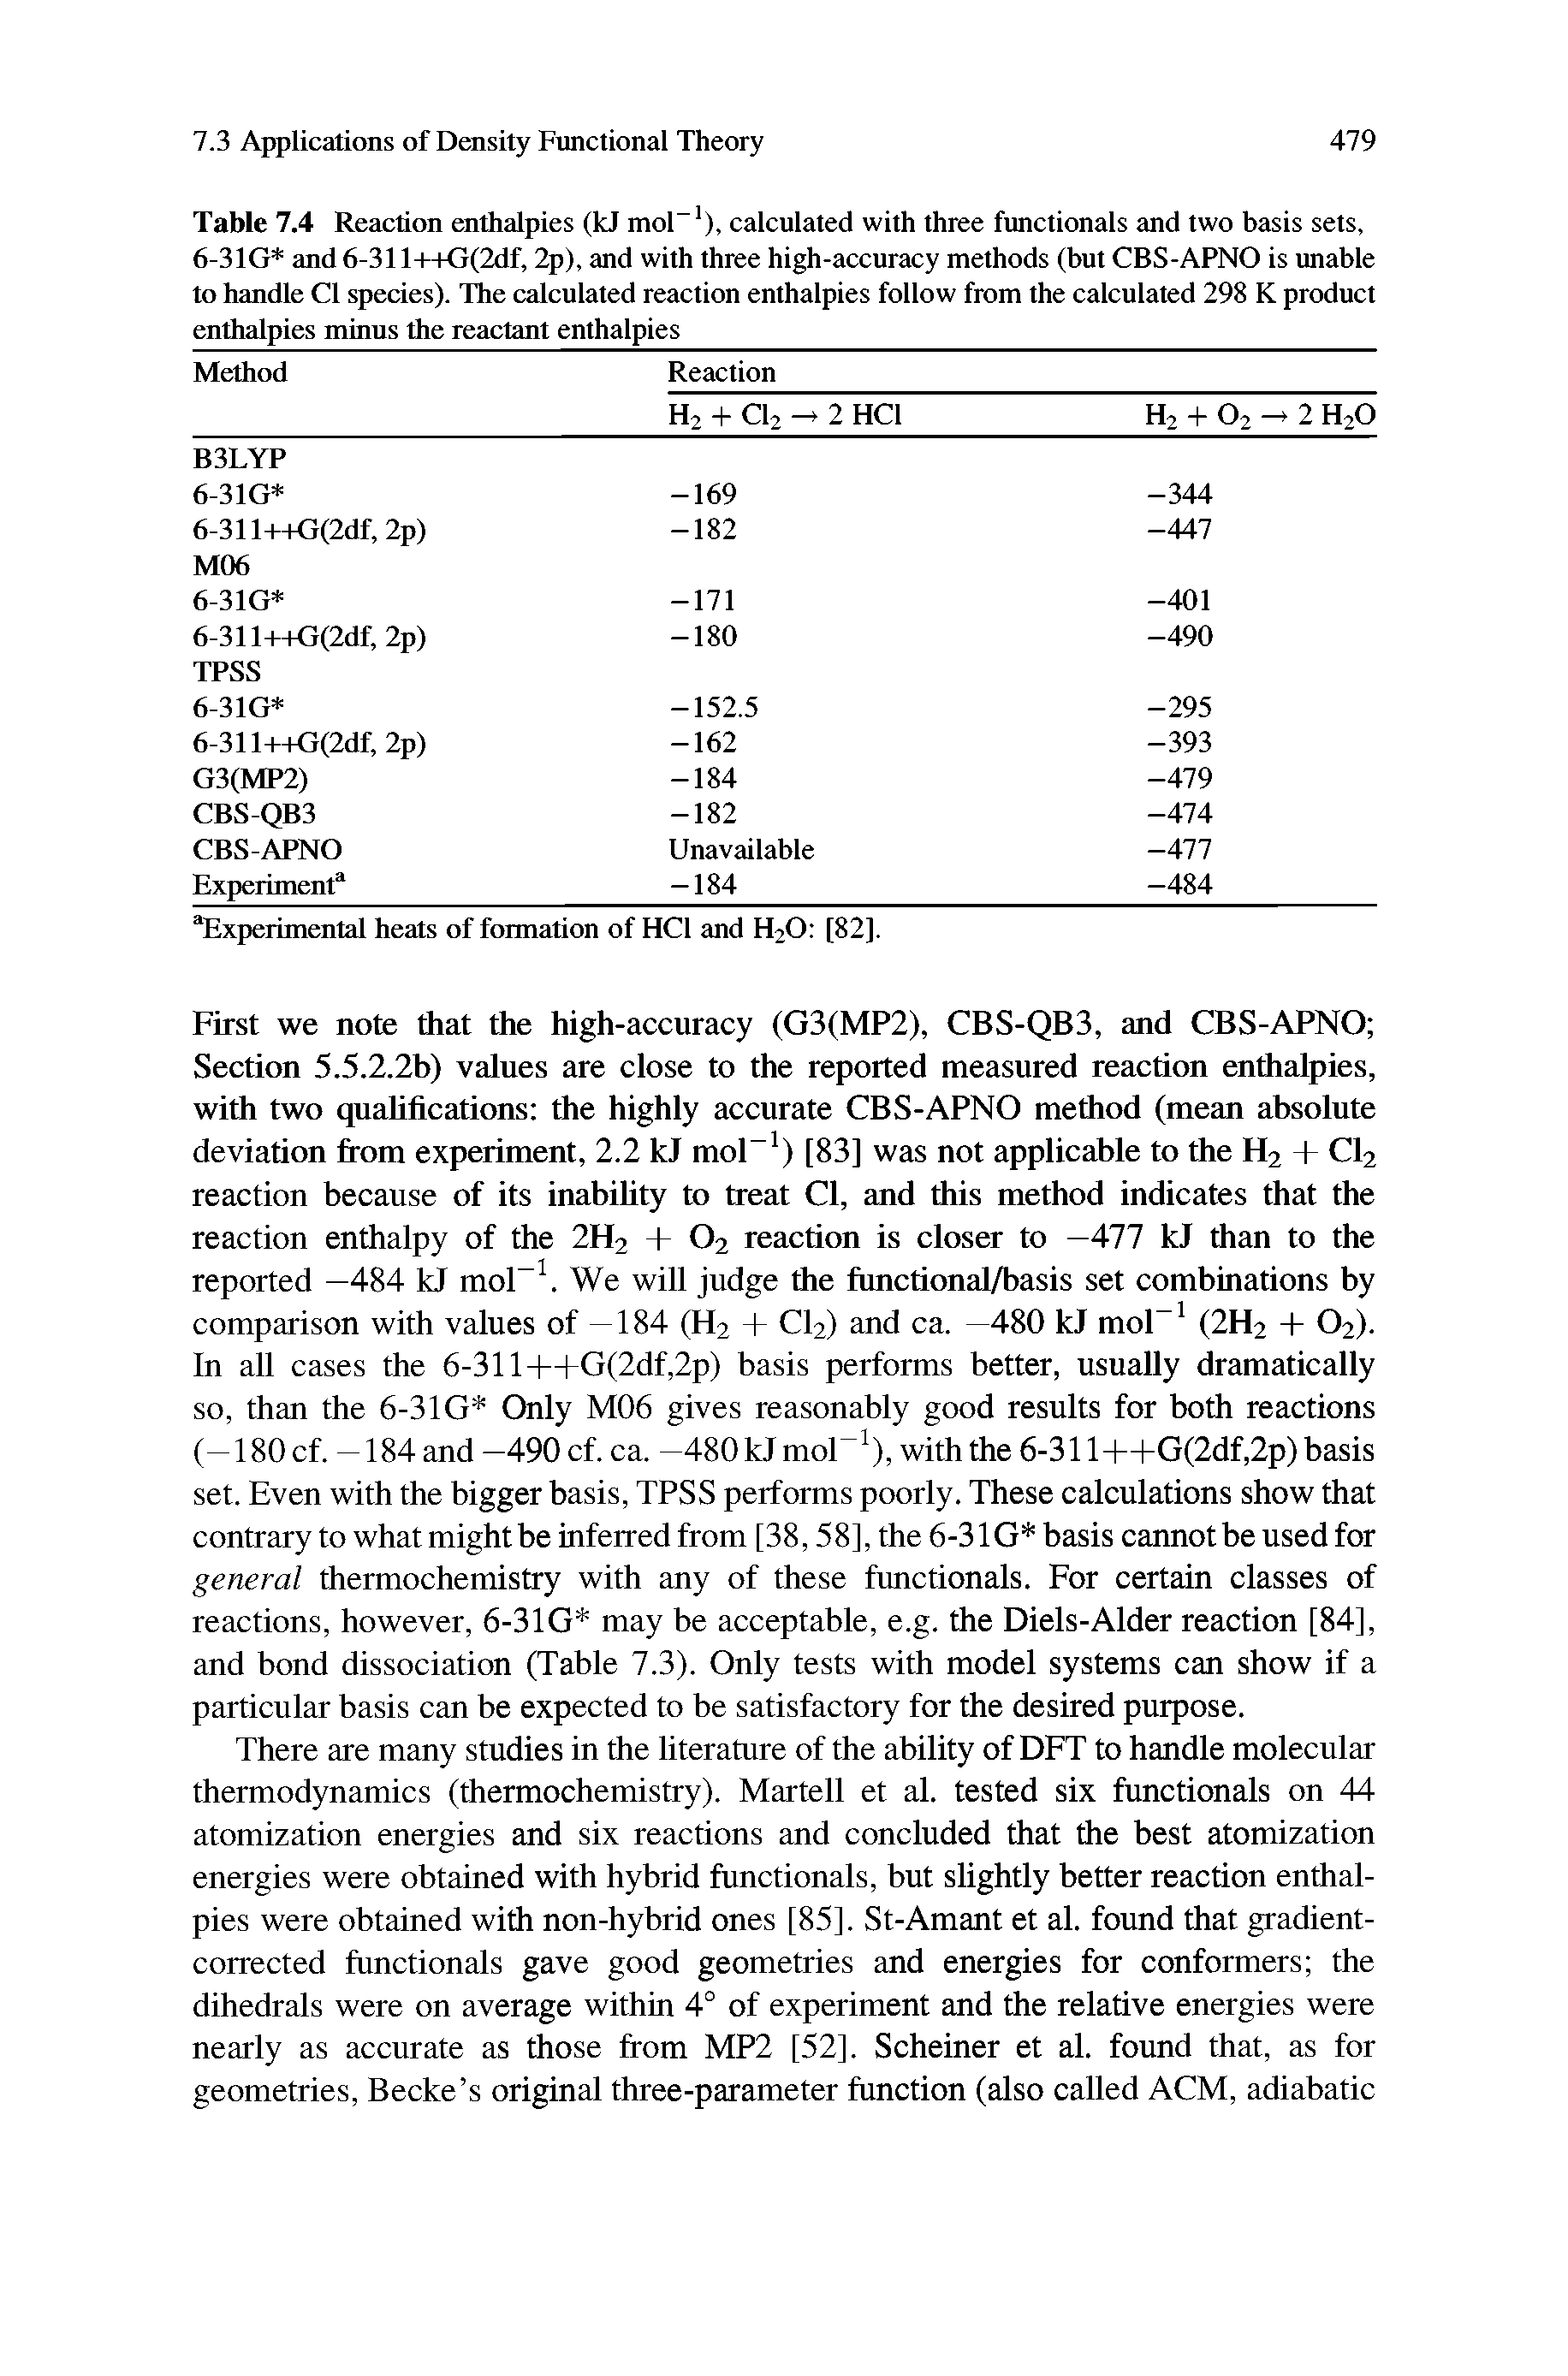 Table 7.4 Reaction enthalpies (kJ mol-1), calculated with three functionals and two basis sets, 6-31G and 6-311++G(2df, 2p), and with three high-accuracy methods (but CBS-APNO is unable to handle Cl species). The calculated reaction enthalpies follow from the calculated 298 K product enthalpies minus the reactant enthalpies...